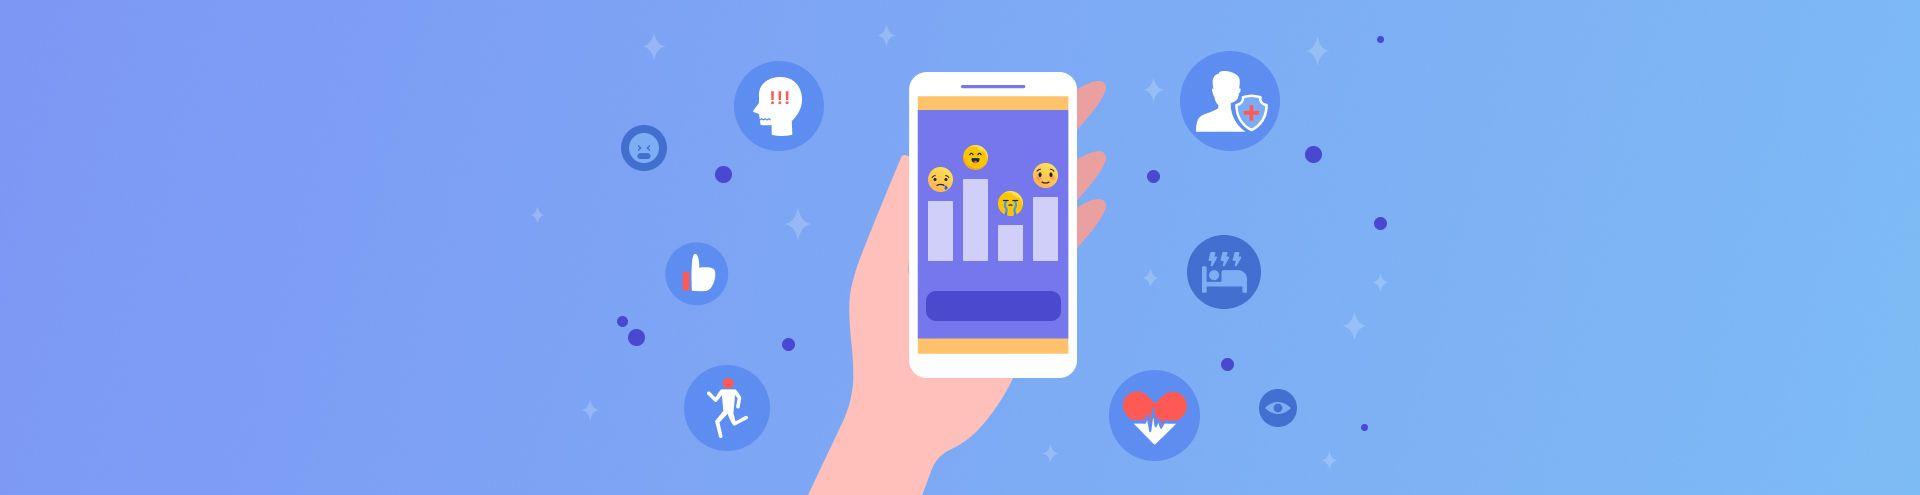 Mental Health App Development: 10 Best Apps For Anxiety